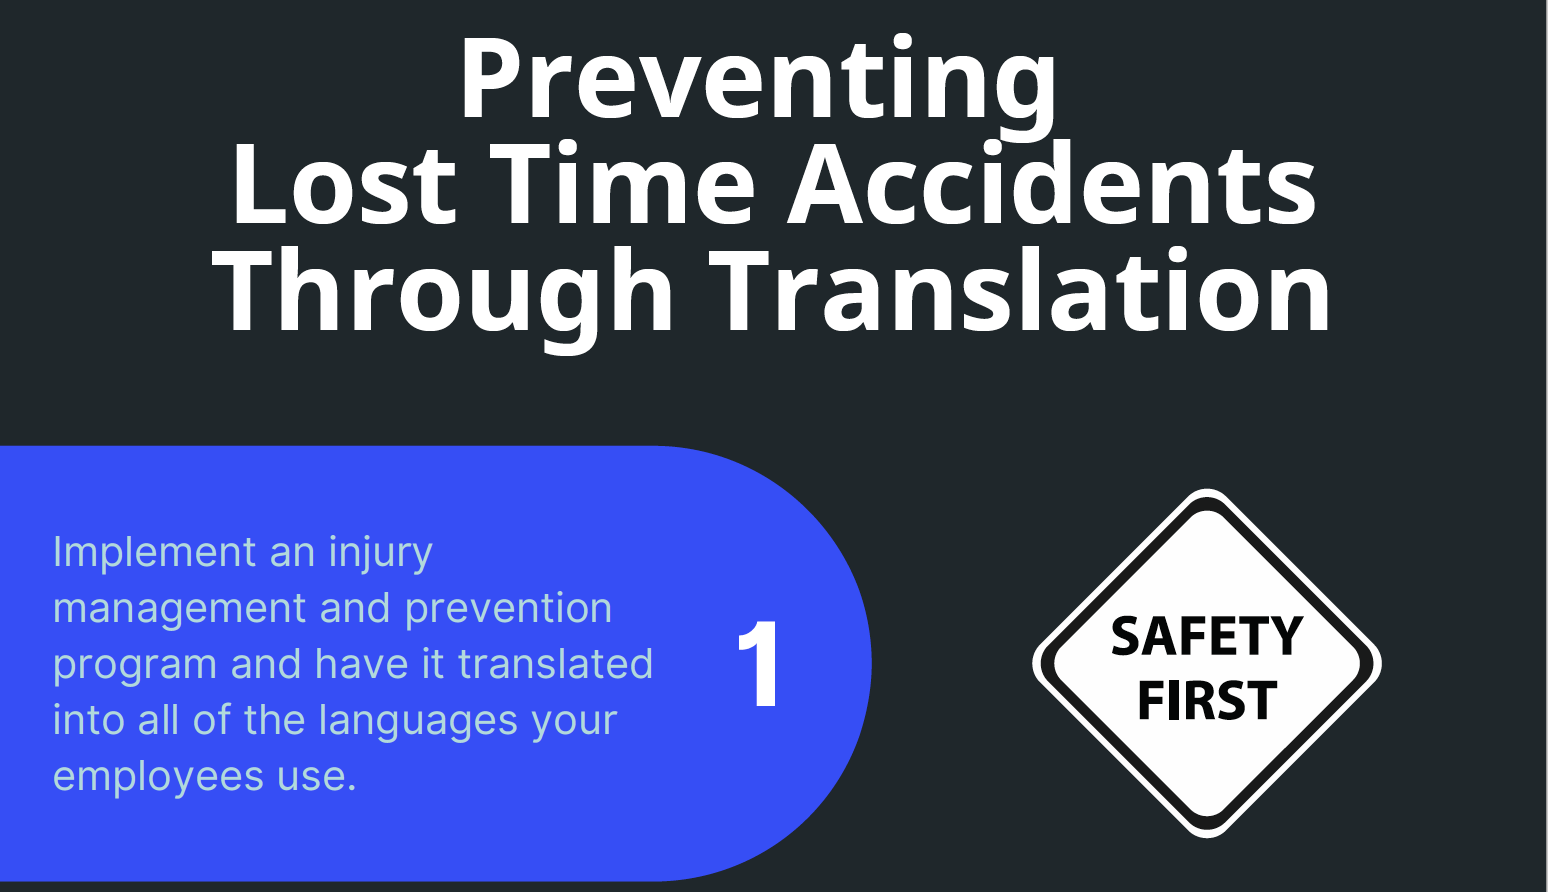 Preventing Lost Time Accidents Through Translation